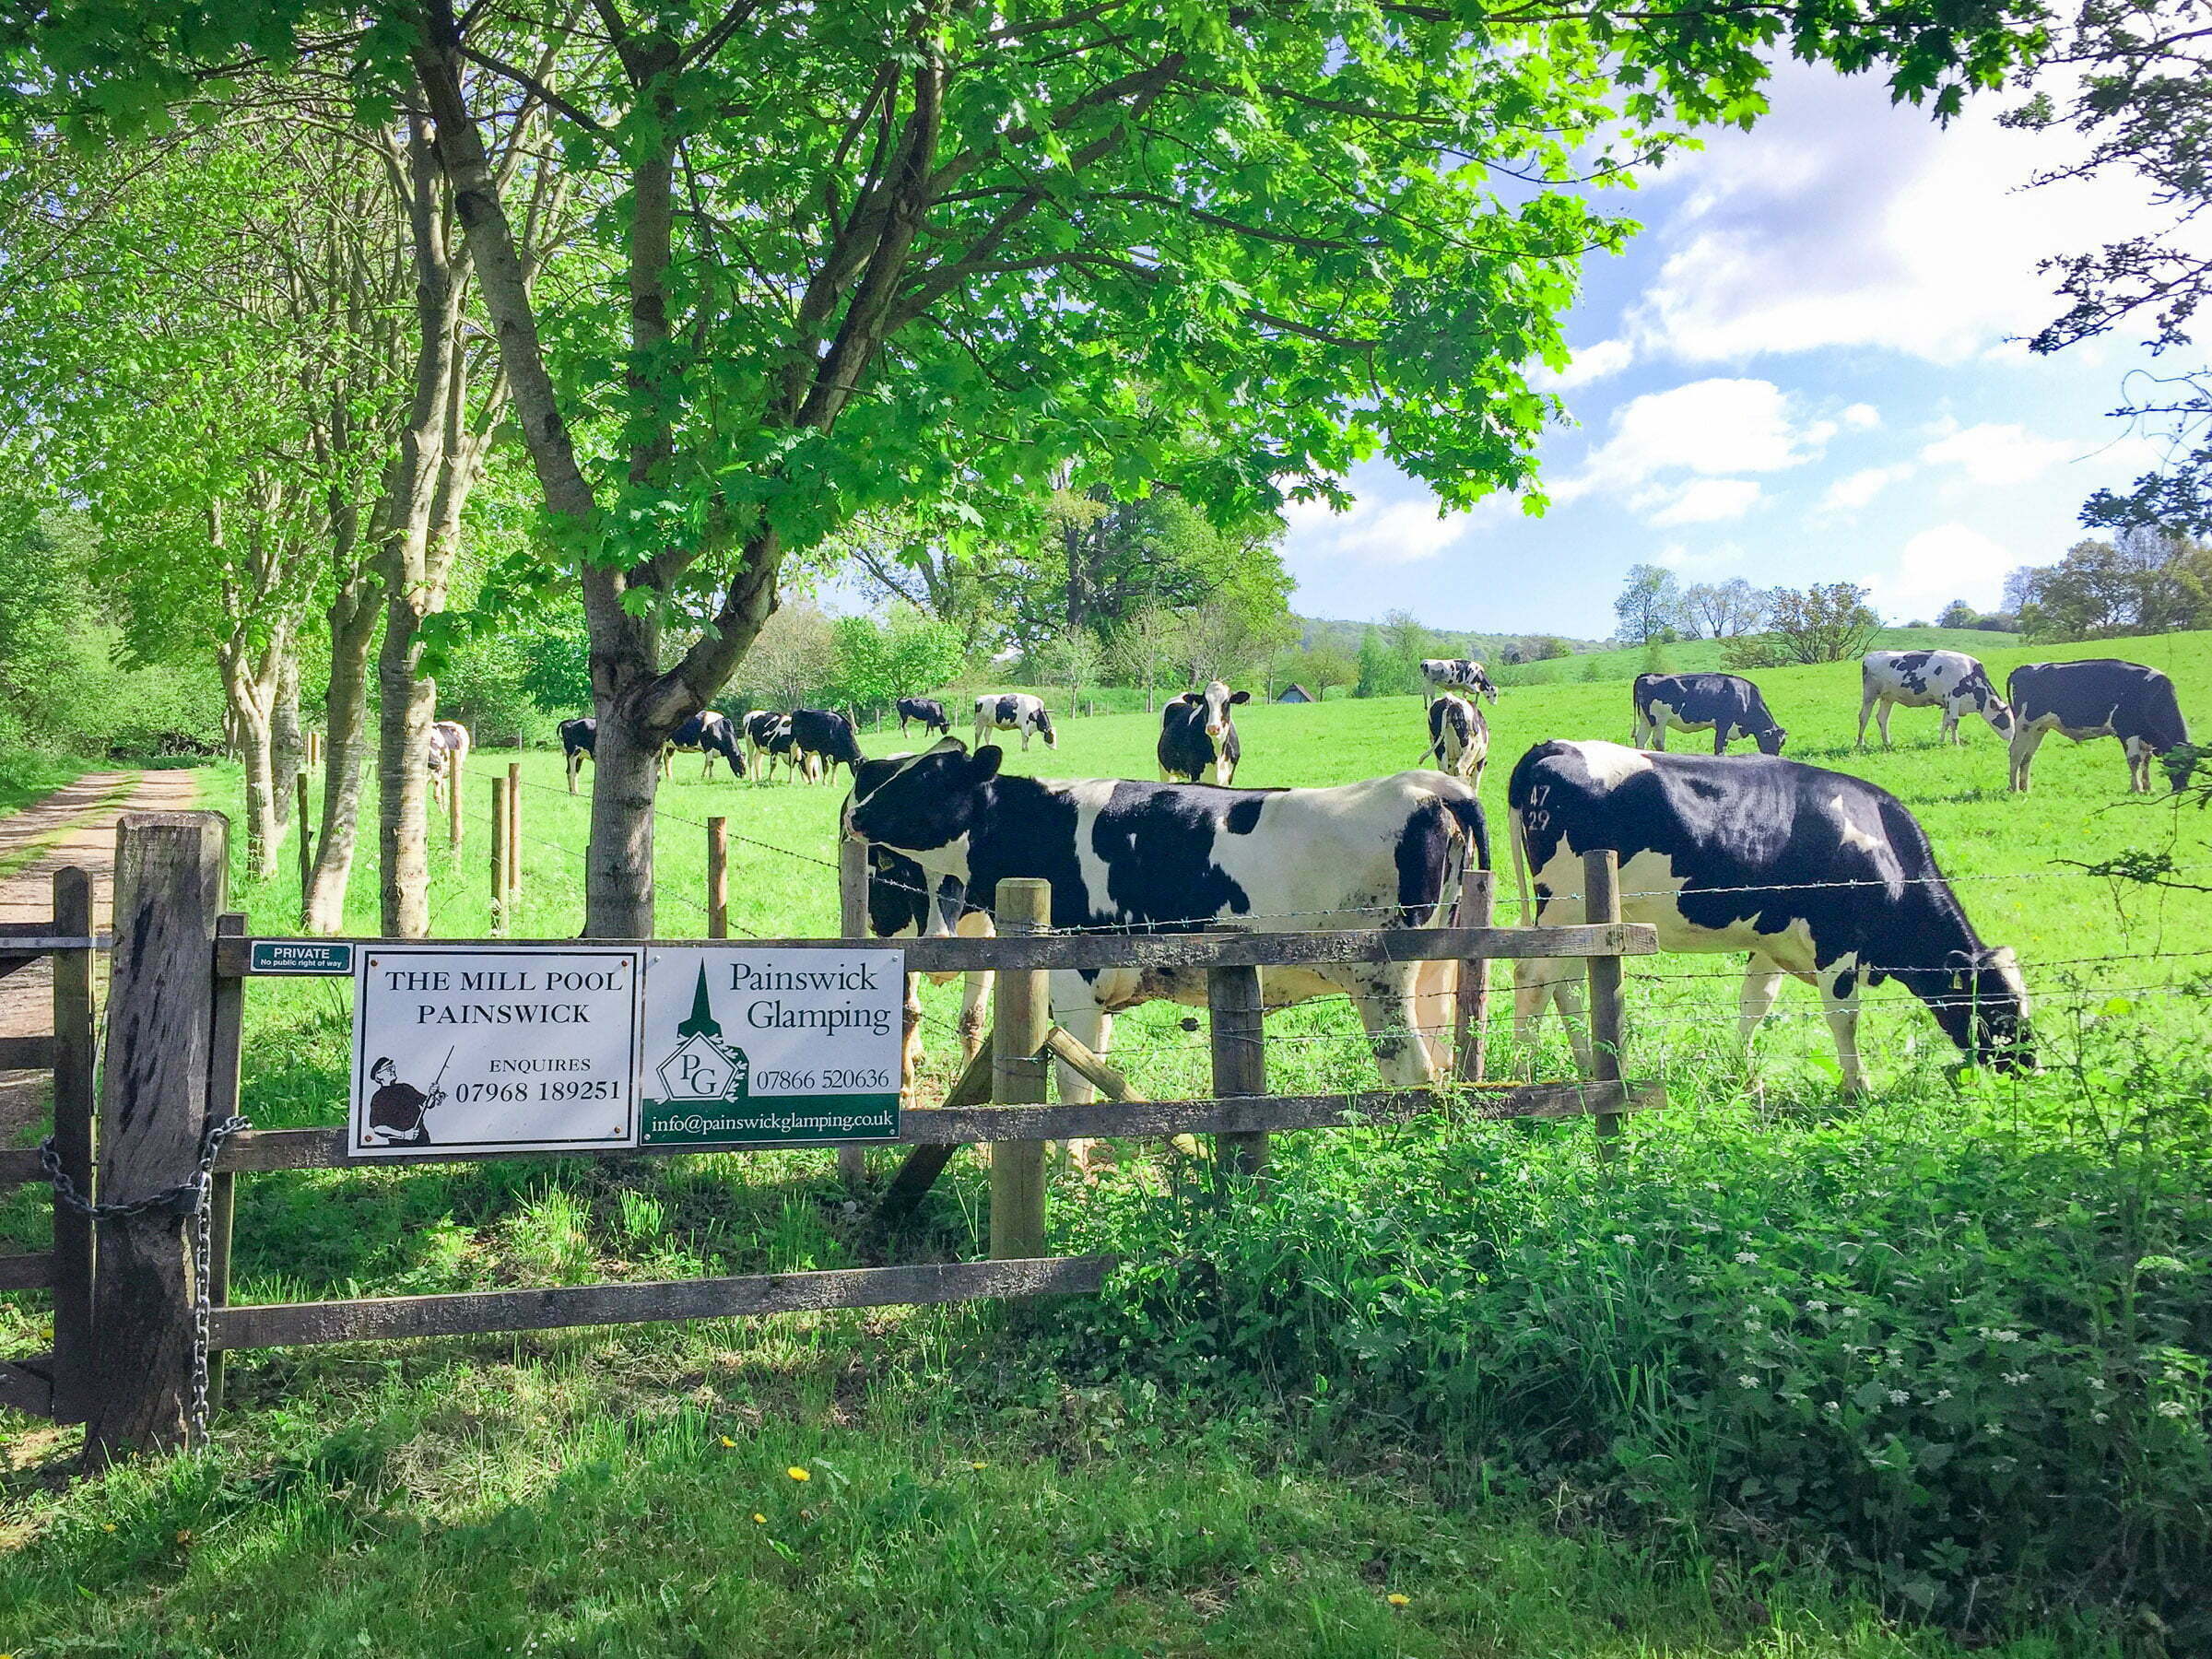 Painswick Glamping – Entrance and cows